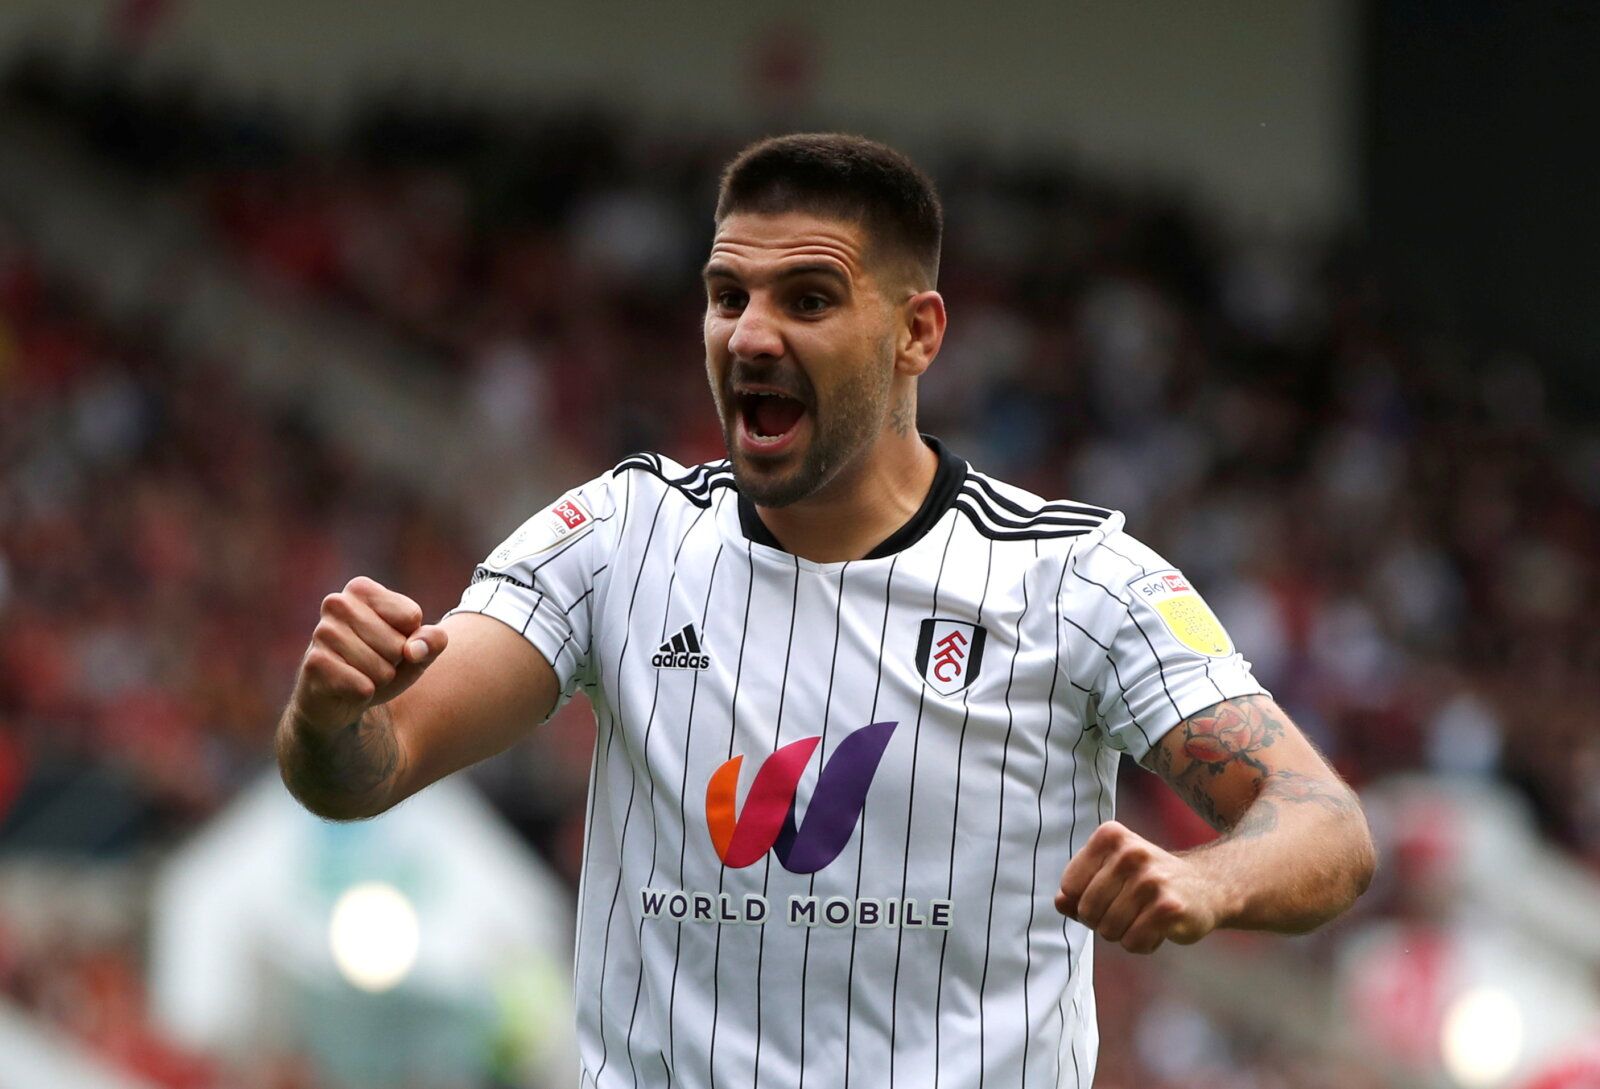 Soccer Football - Championship - Bristol City v Fulham - Ashton Gate Stadium, Bristol, Britain - September 25, 2021  Fulham's Aleksandar Mitrovic celebrates scoring their first goal   Action Images/Paul Childs  EDITORIAL USE ONLY. No use with unauthorized audio, video, data, fixture lists, club/league logos or 